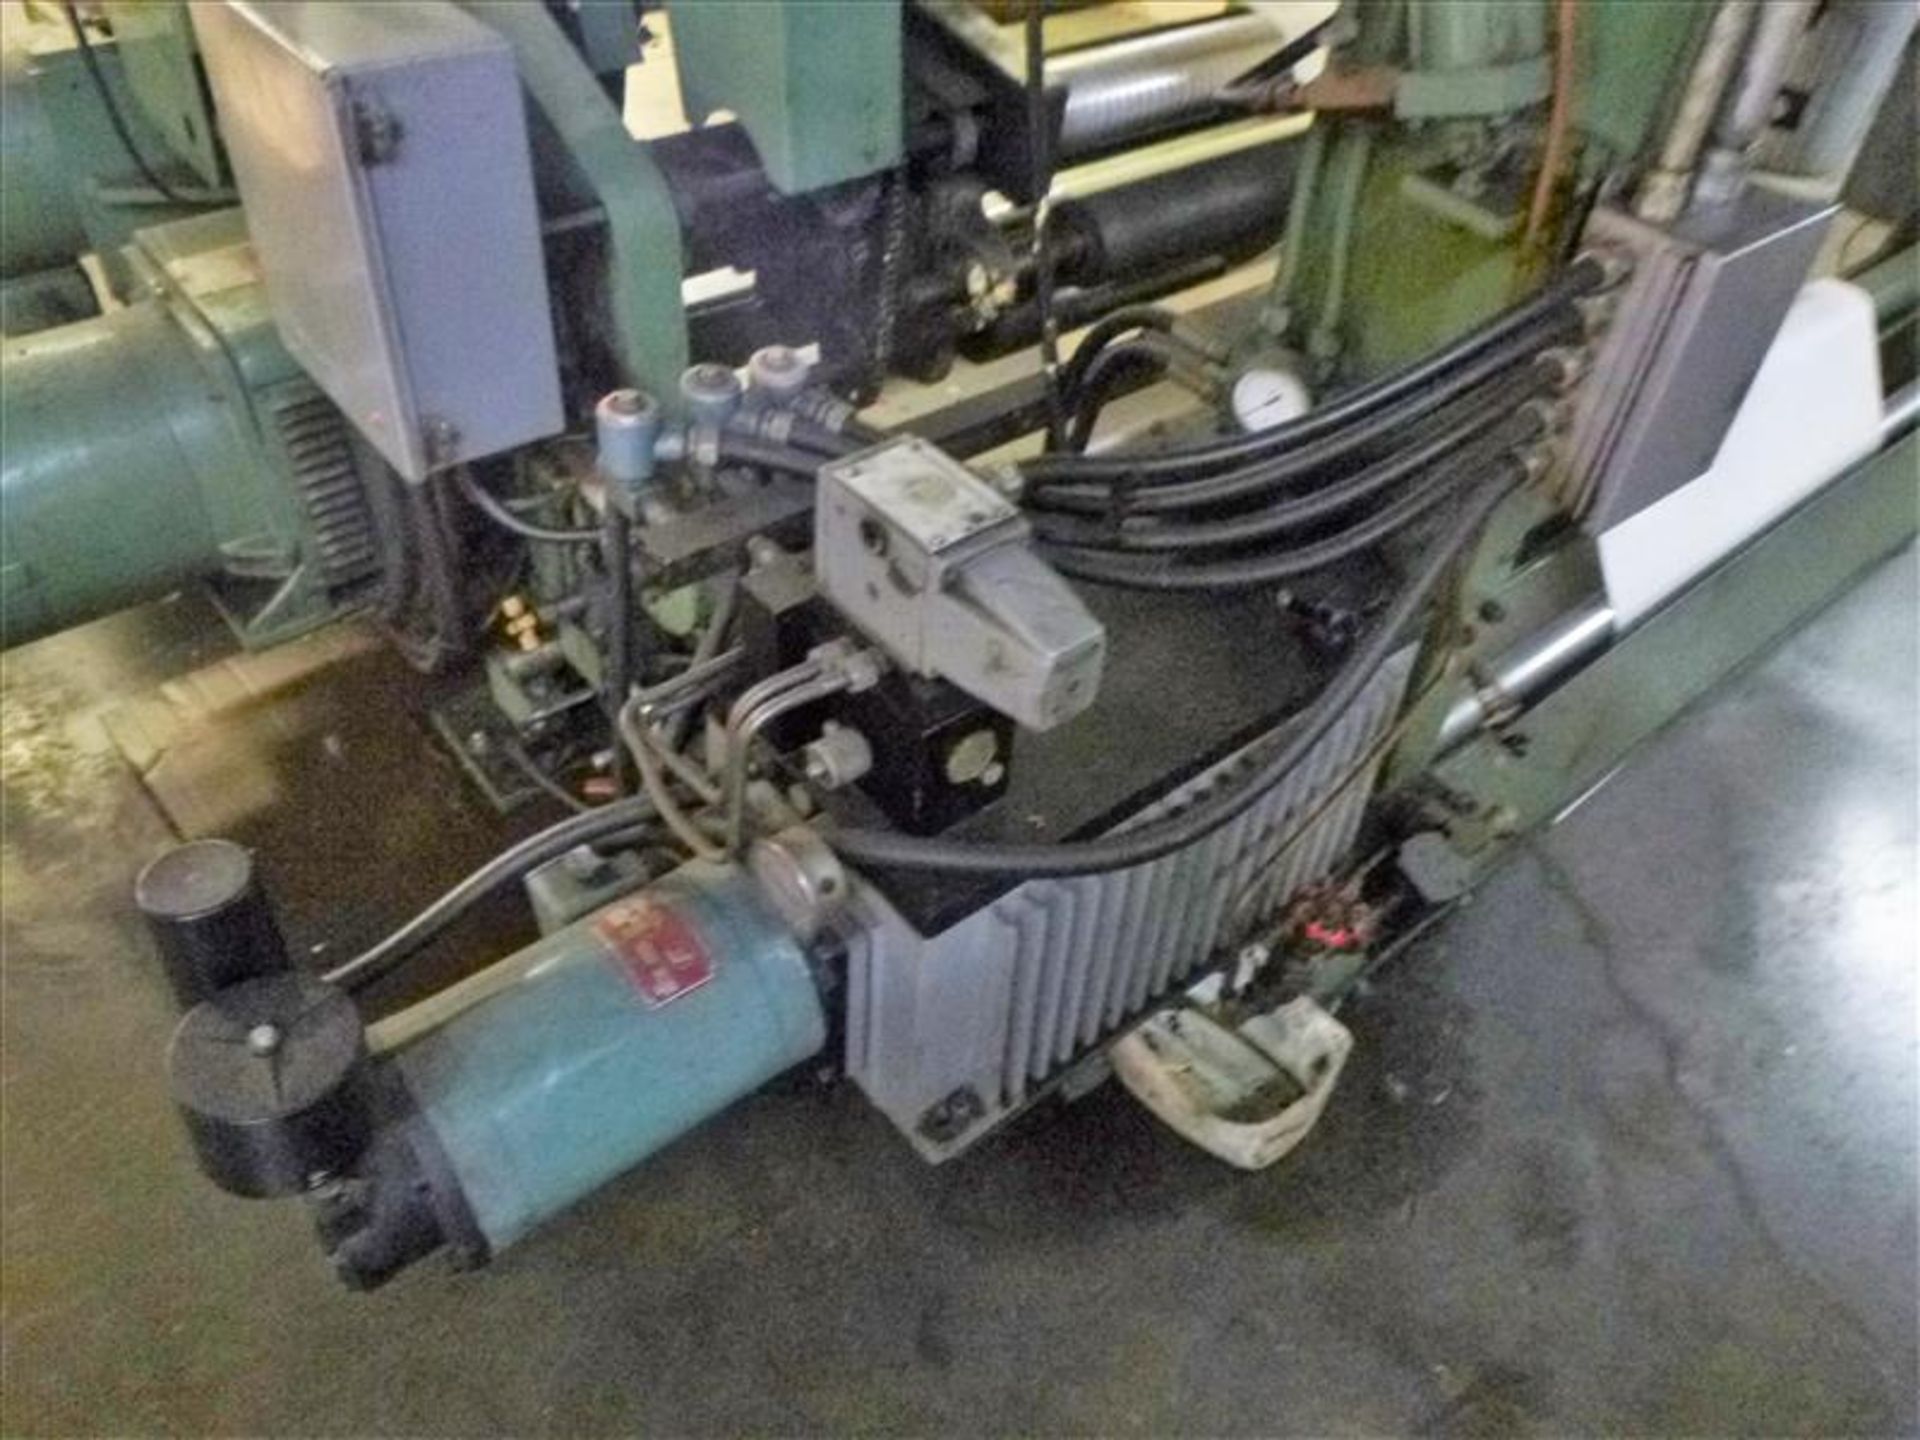 PCMC (Paper Converting Machine Co.) 6-colour central impression flexographic printing press, 56" - Image 26 of 30